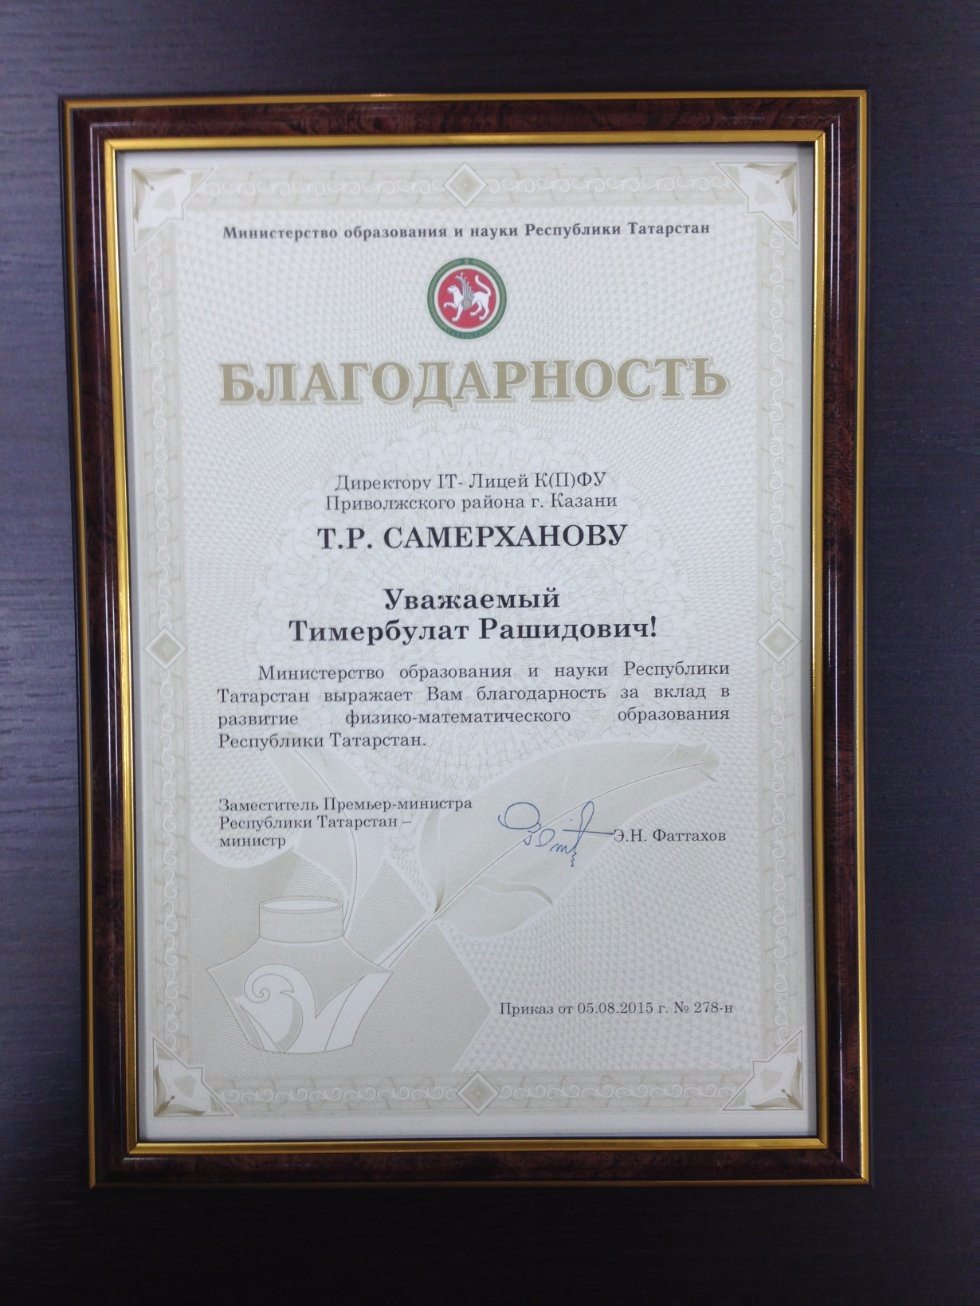 Both Kazan University Lyceums Among the Best in Tatarstan in Physics and Math